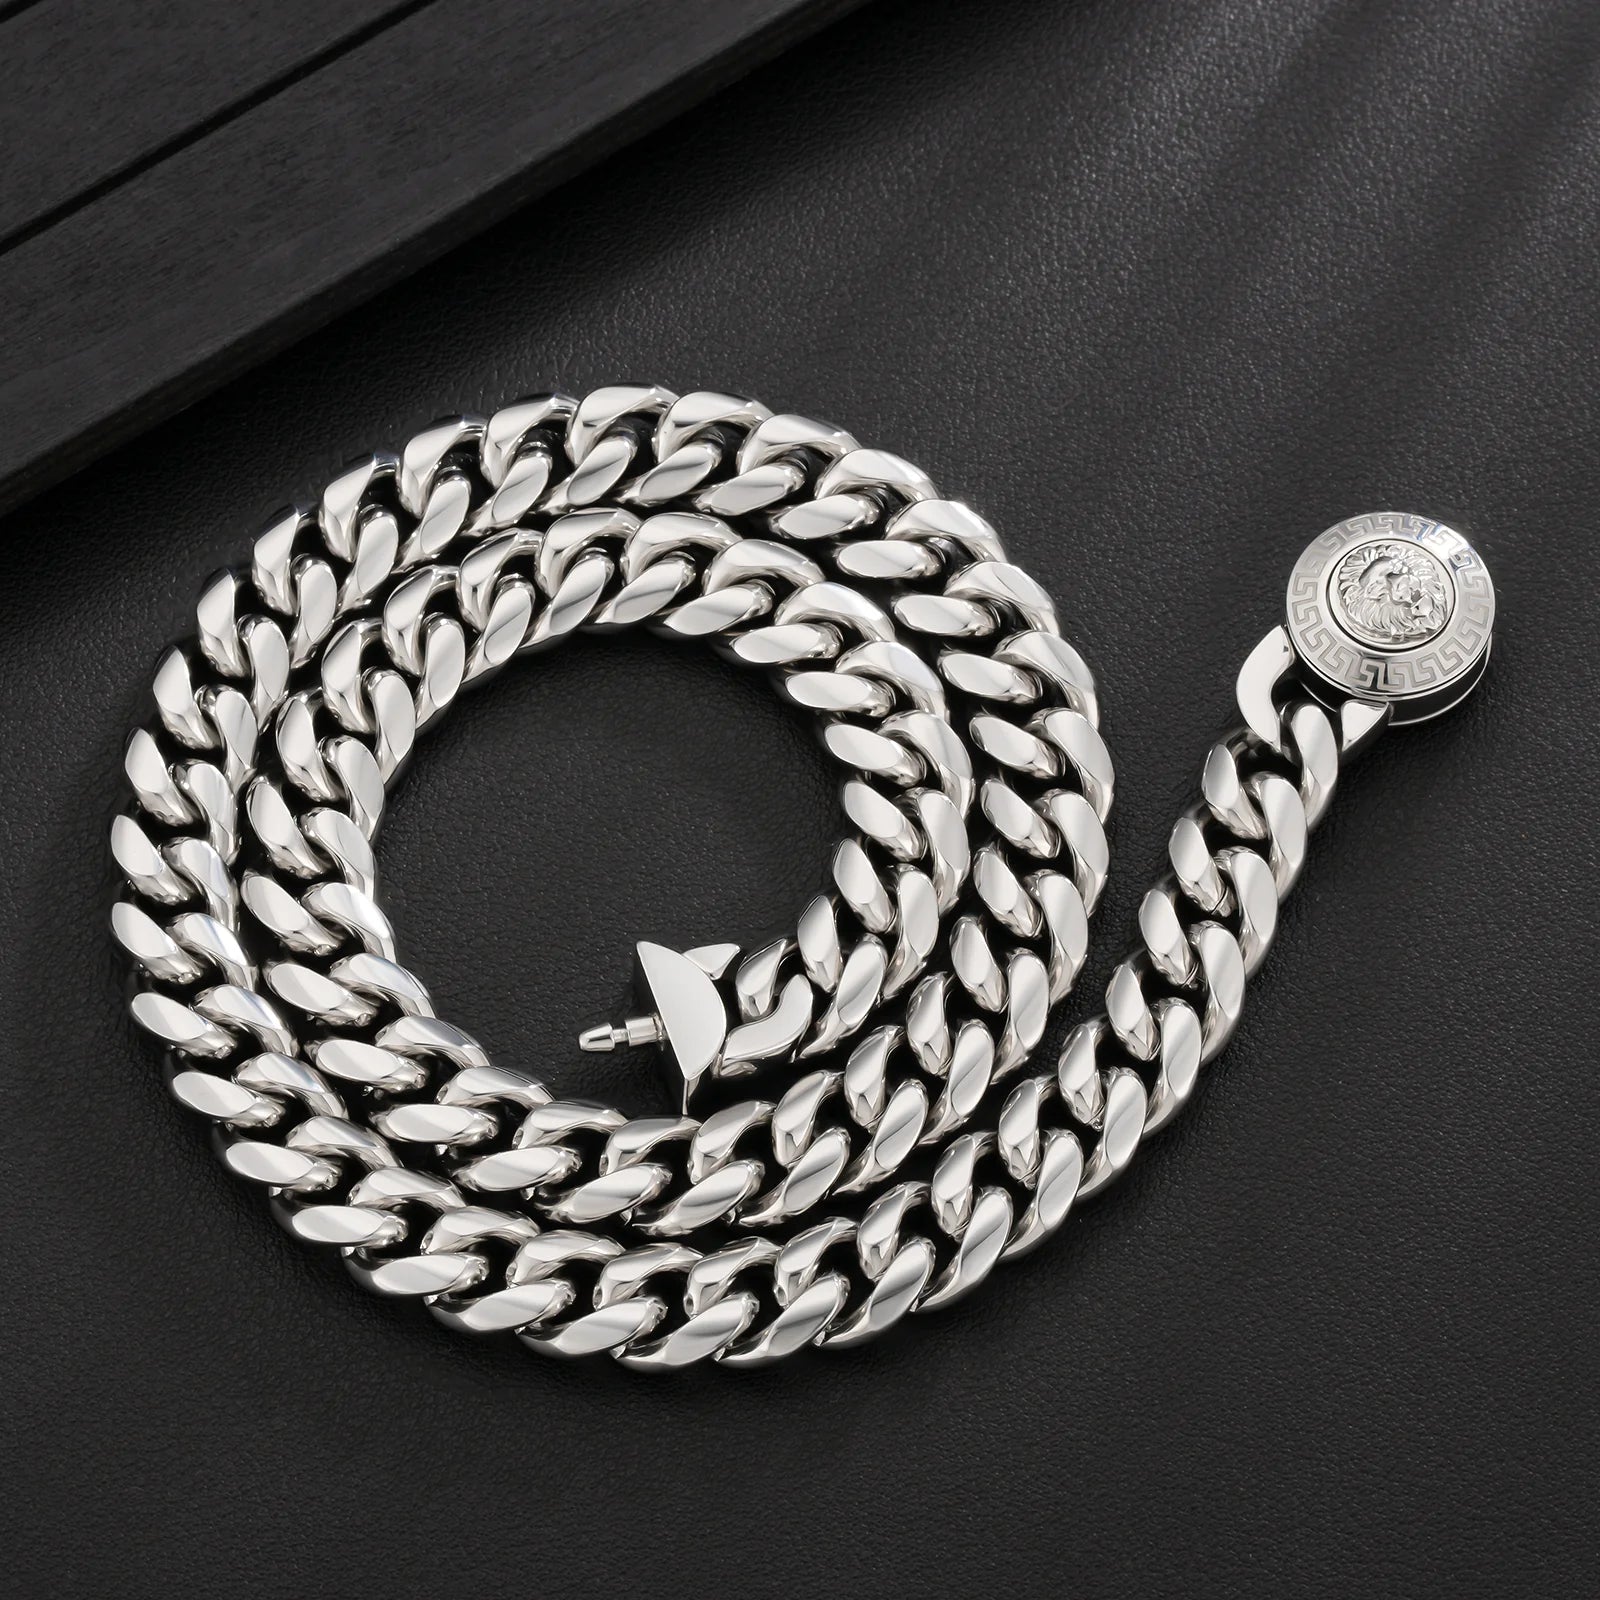 The King - 12mm Cuban Link Chain in White Gold Plated Necklaces 